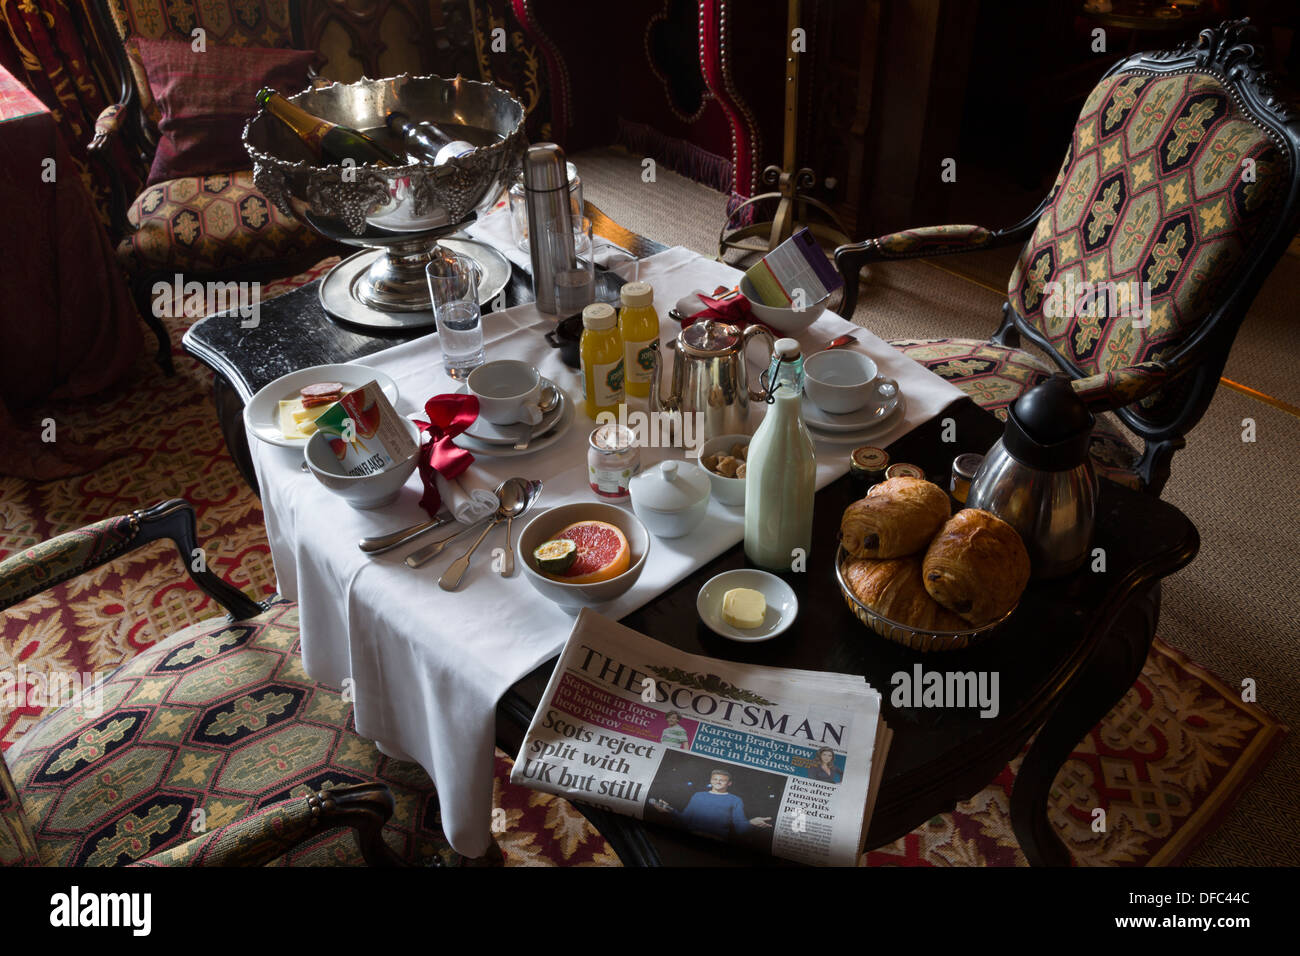 Breakfast at The Old Rectory, accommodation at The Witchery by the Castle, Edinburgh, Scotland Stock Photo